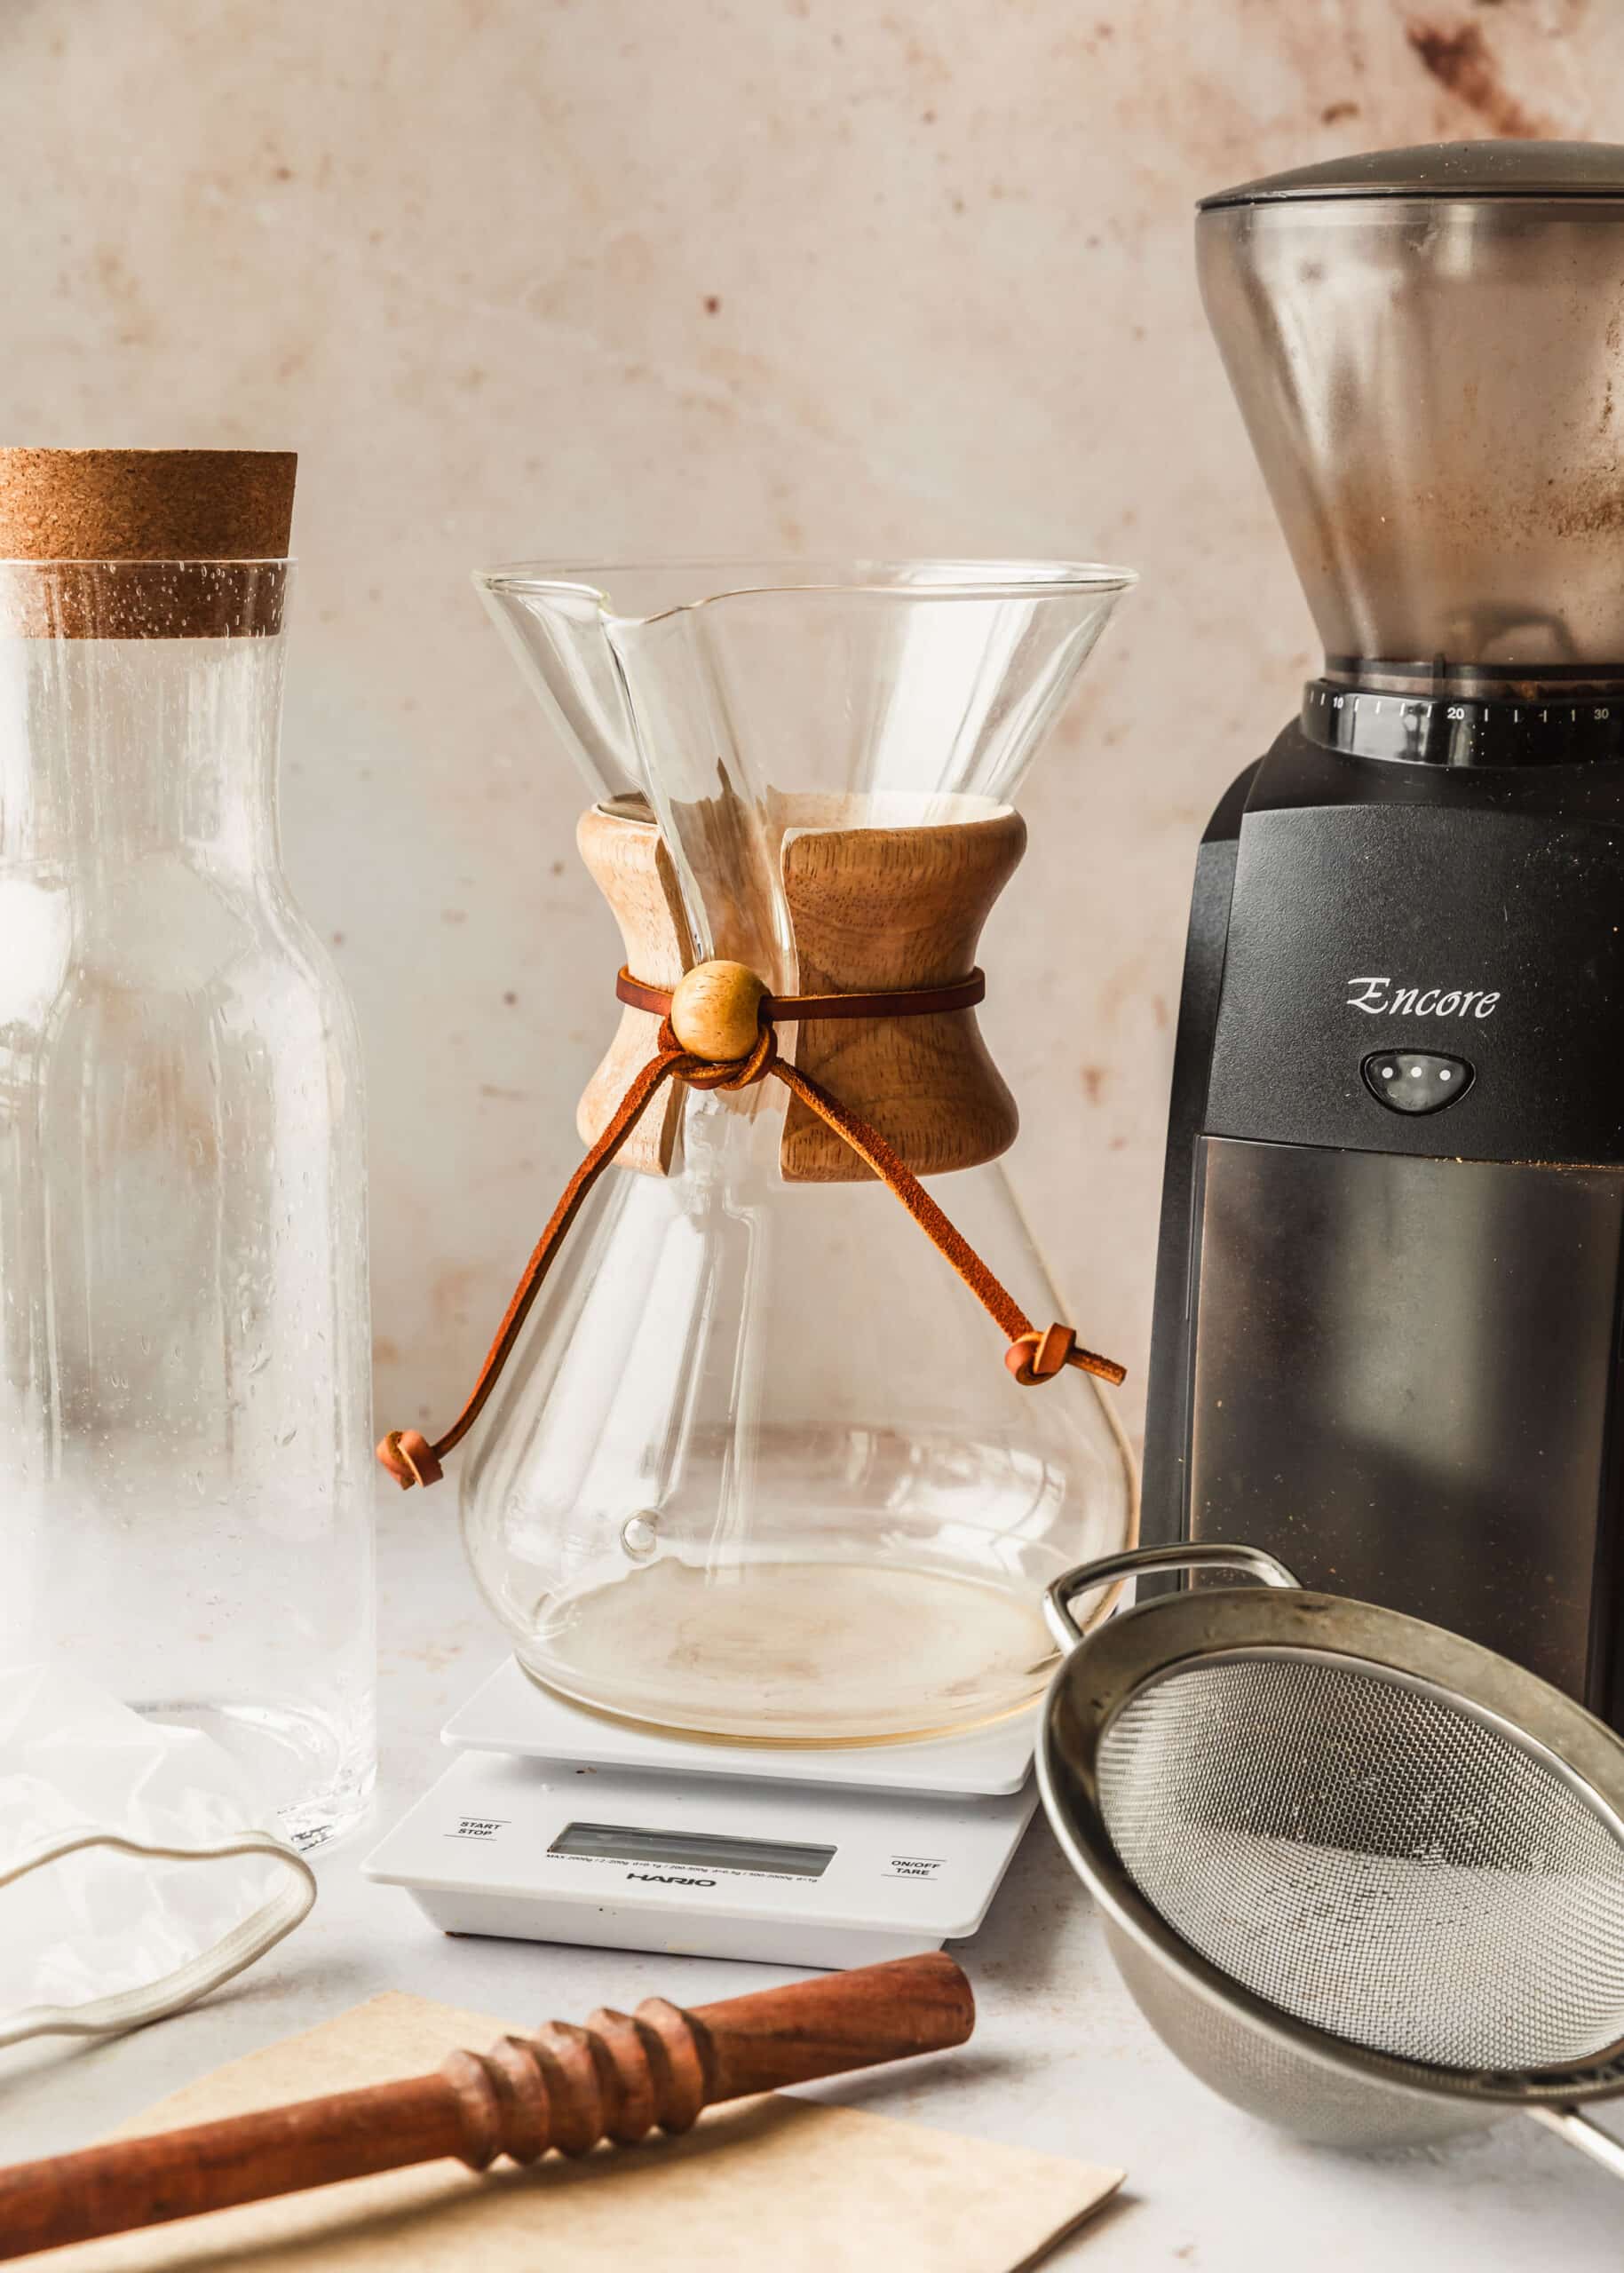 A Chemex, pitcher, grinder, scale, sieve, and wood spoon on a beige counter.